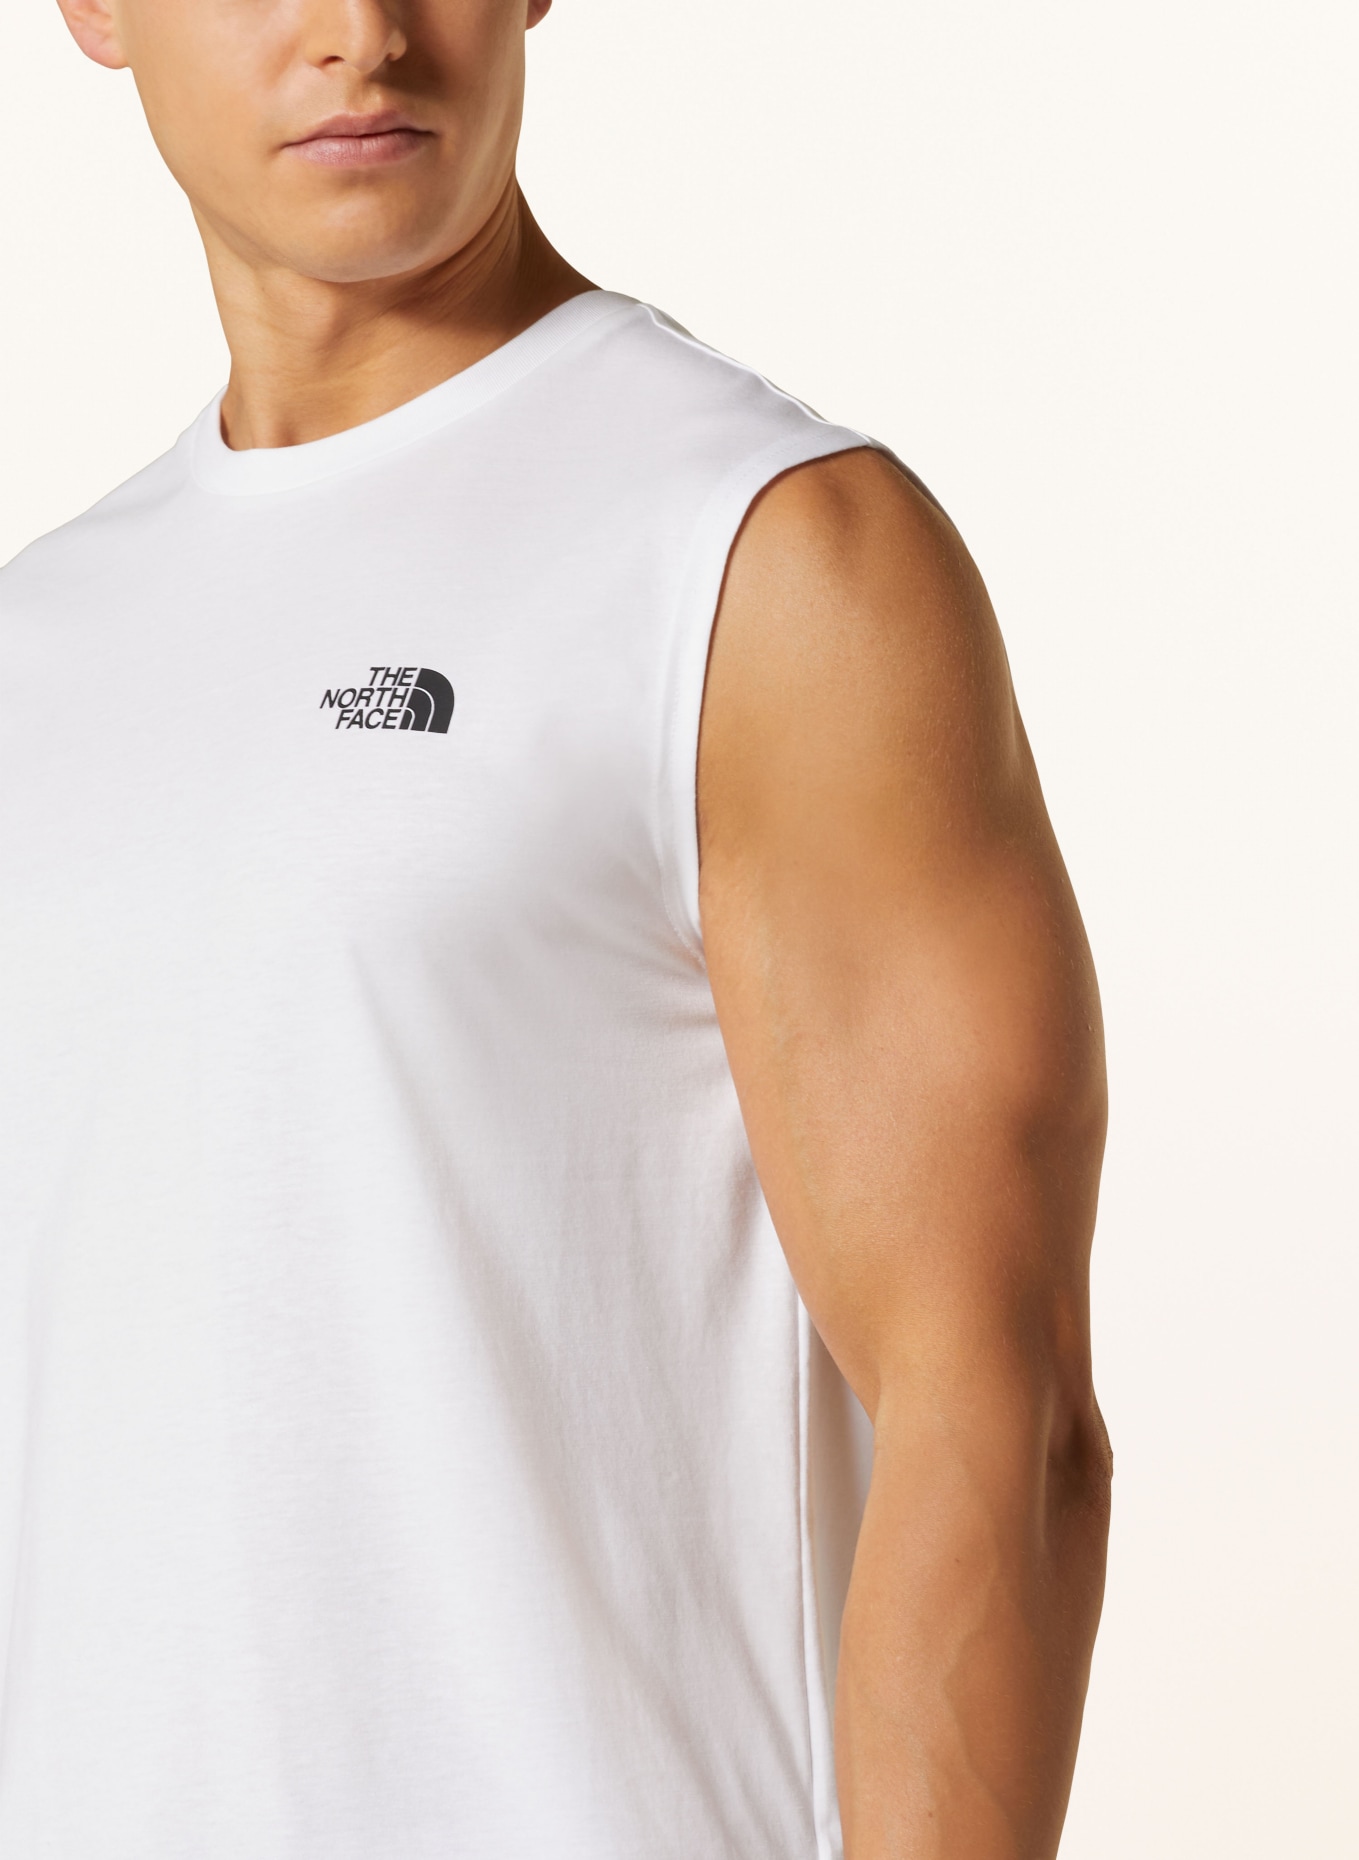 THE NORTH FACE Oversized-Tanktop SIMPLE DOME, Farbe: WEISS (Bild 4)